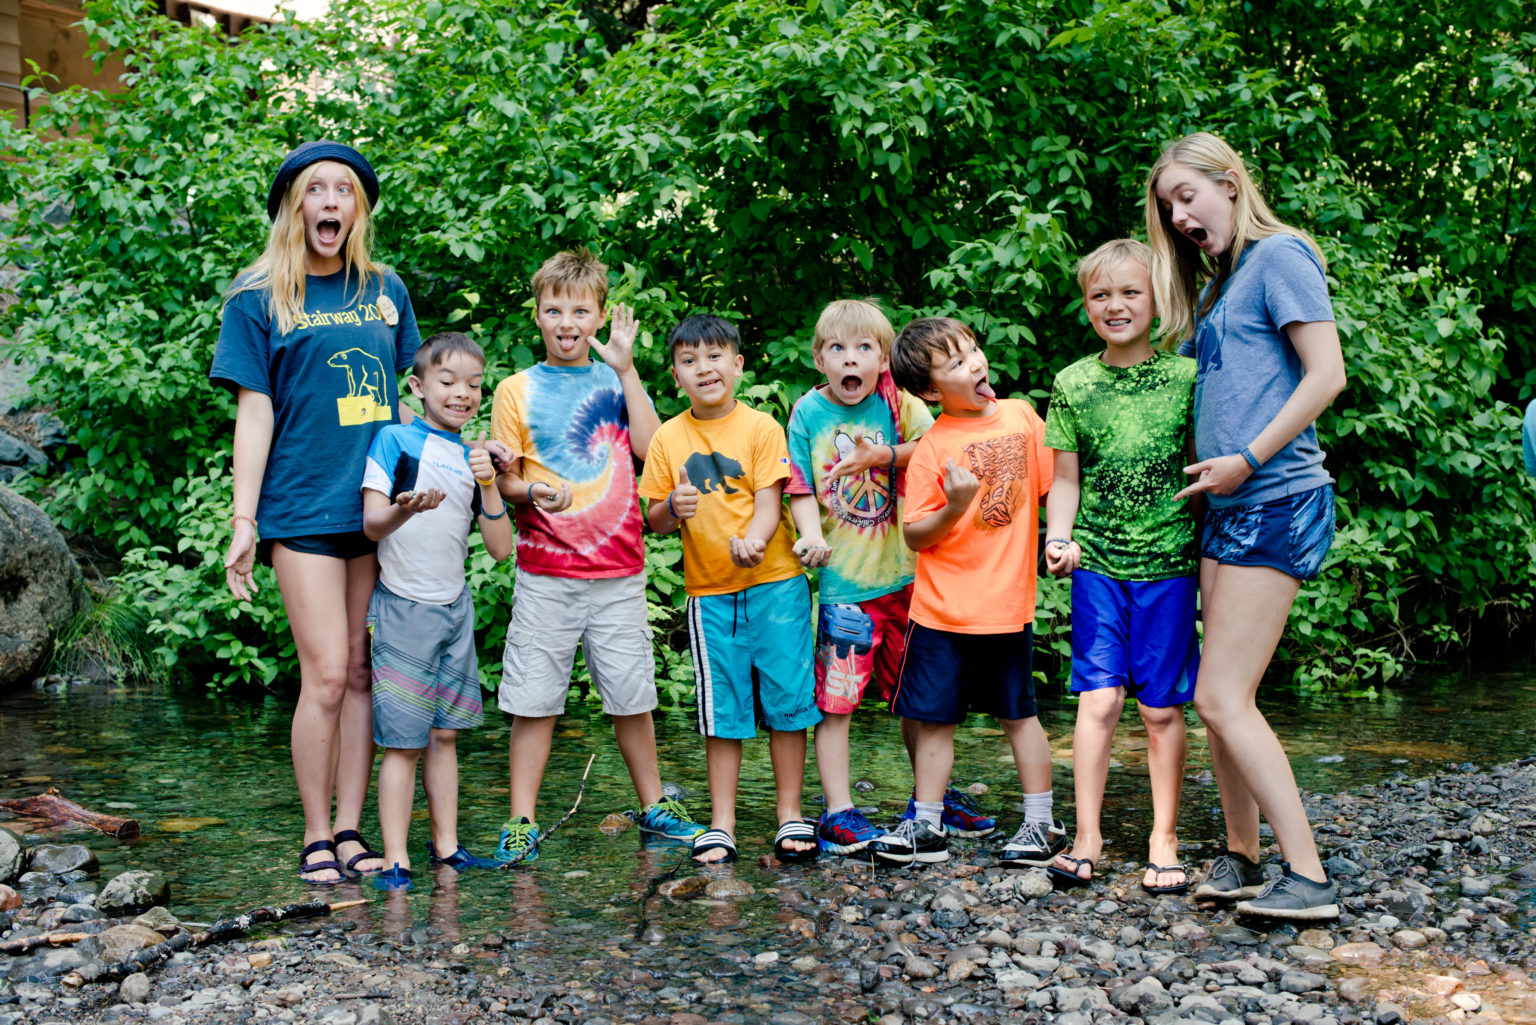 Kids and staffers making funny faces in the creek